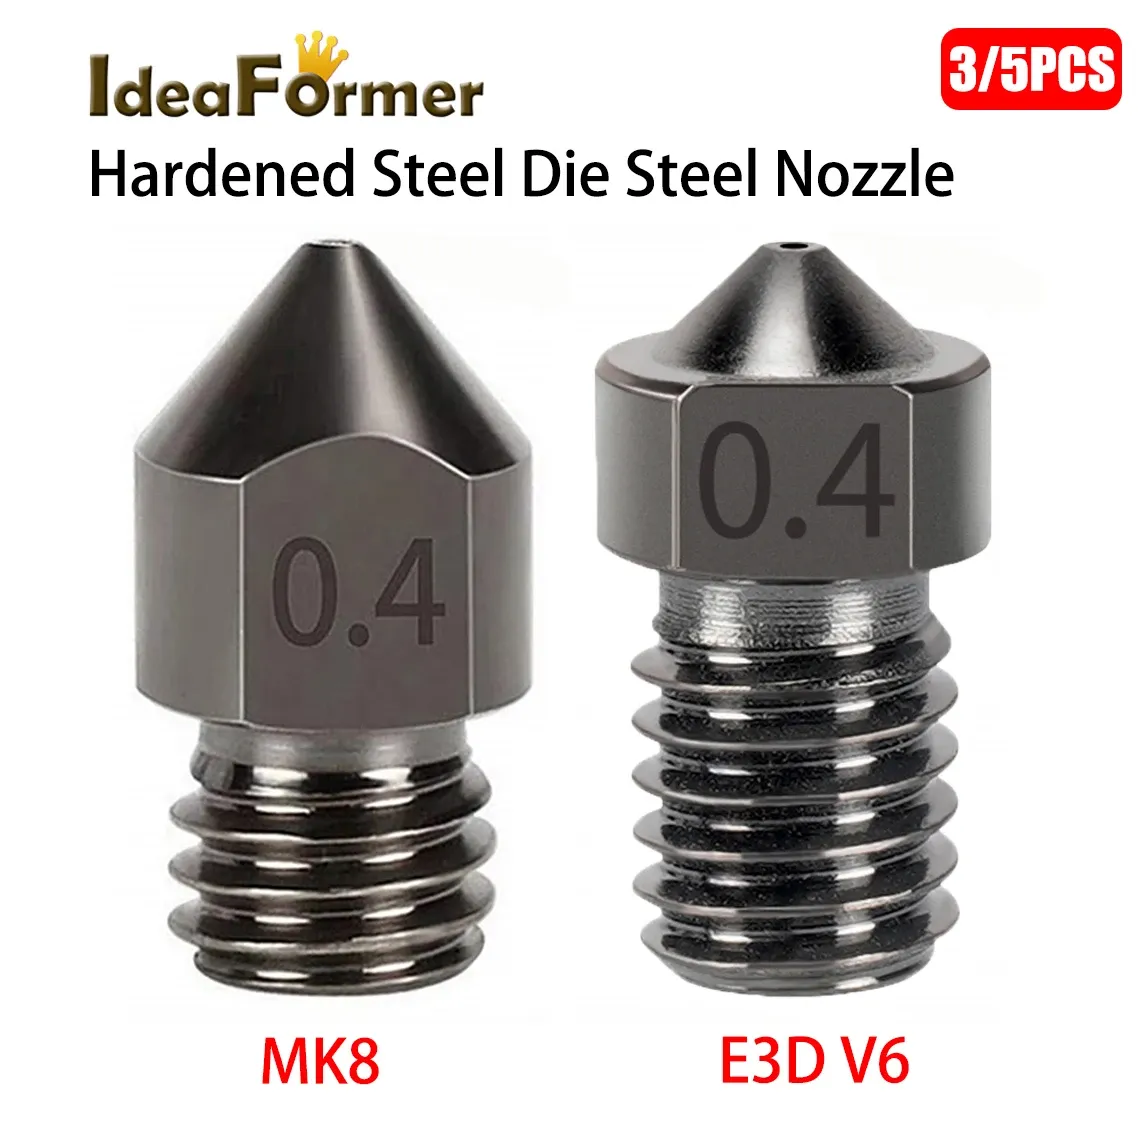 IdeaFormer 3/5pcs Hardened Steel Die Steel Nozzle for MK8 CR10 V6 M6 Thread Extruder Hotend Nozzle 1.75mm Filament